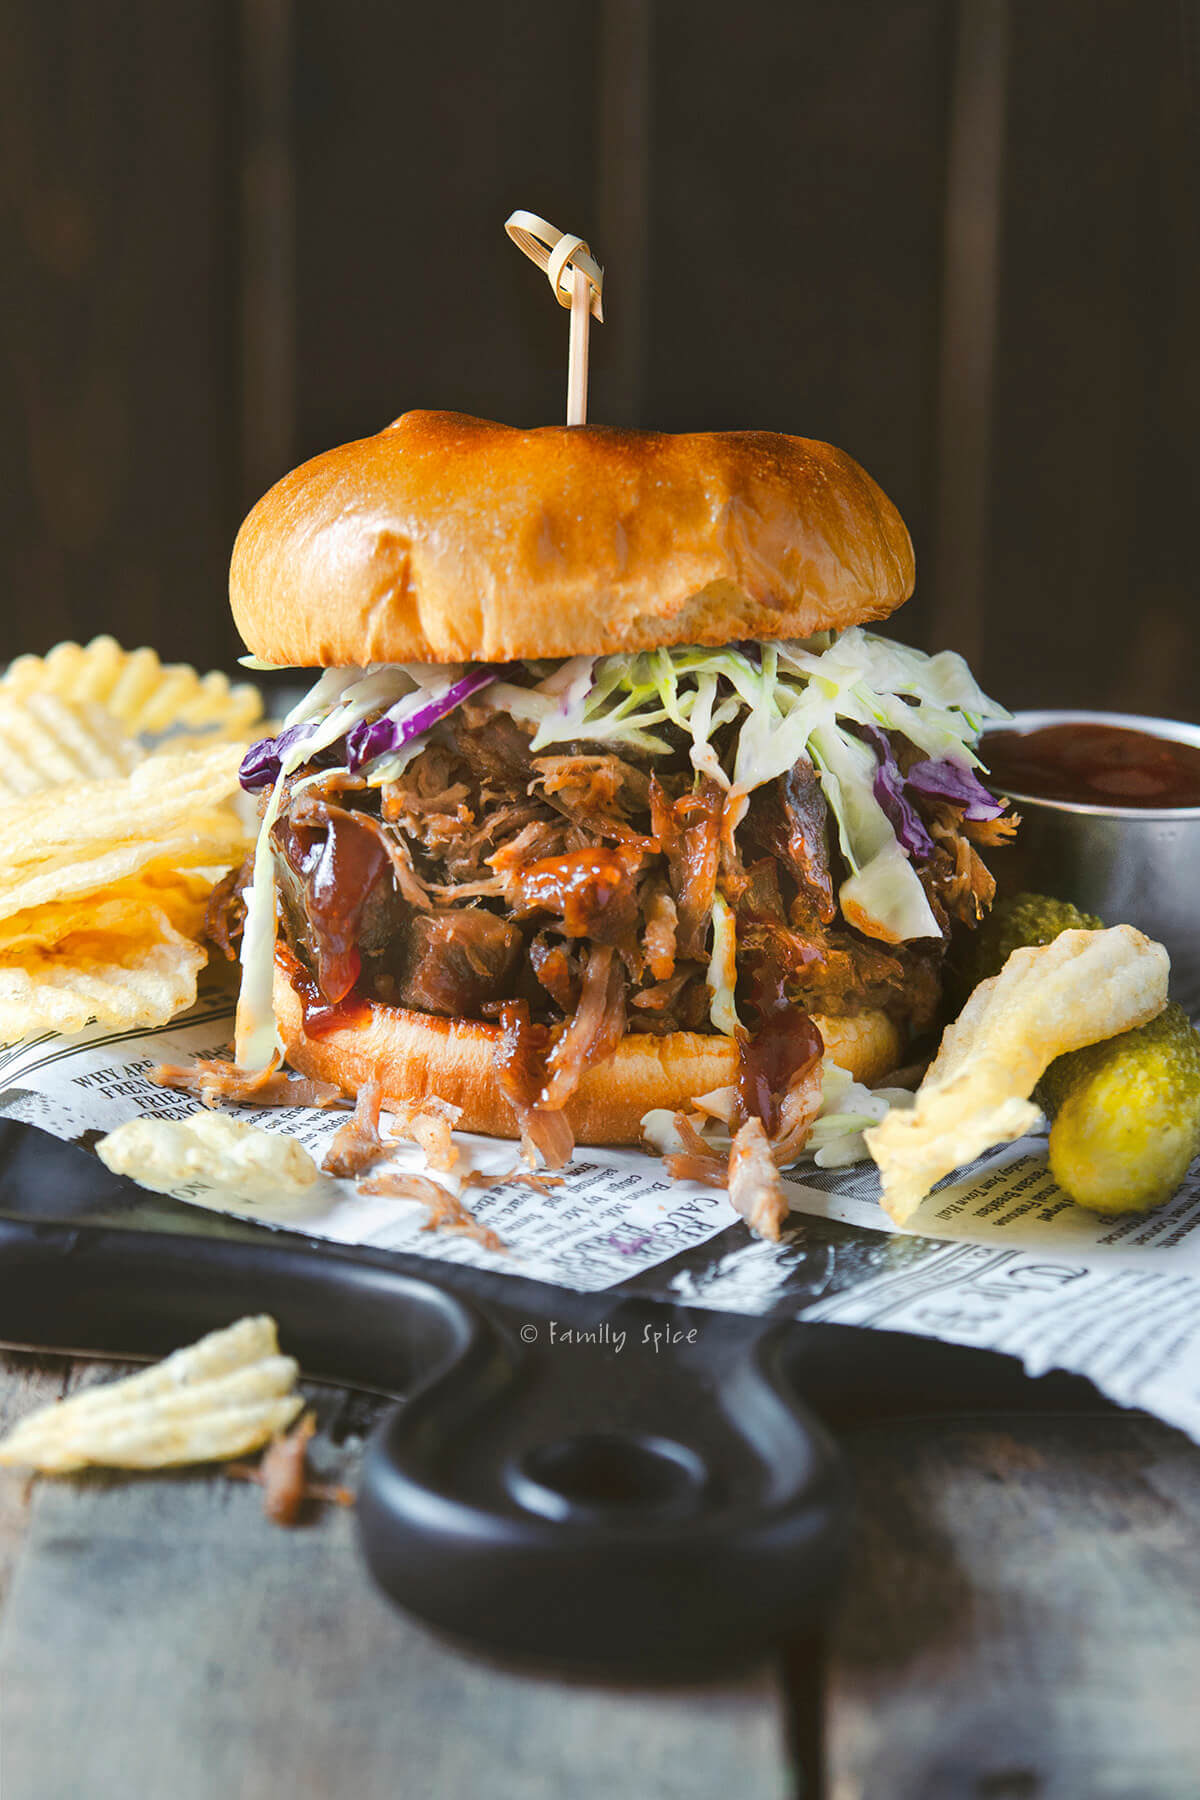 A stuffed pulled pork sandwich dripping with barbecue sauce and served with chips and pickles